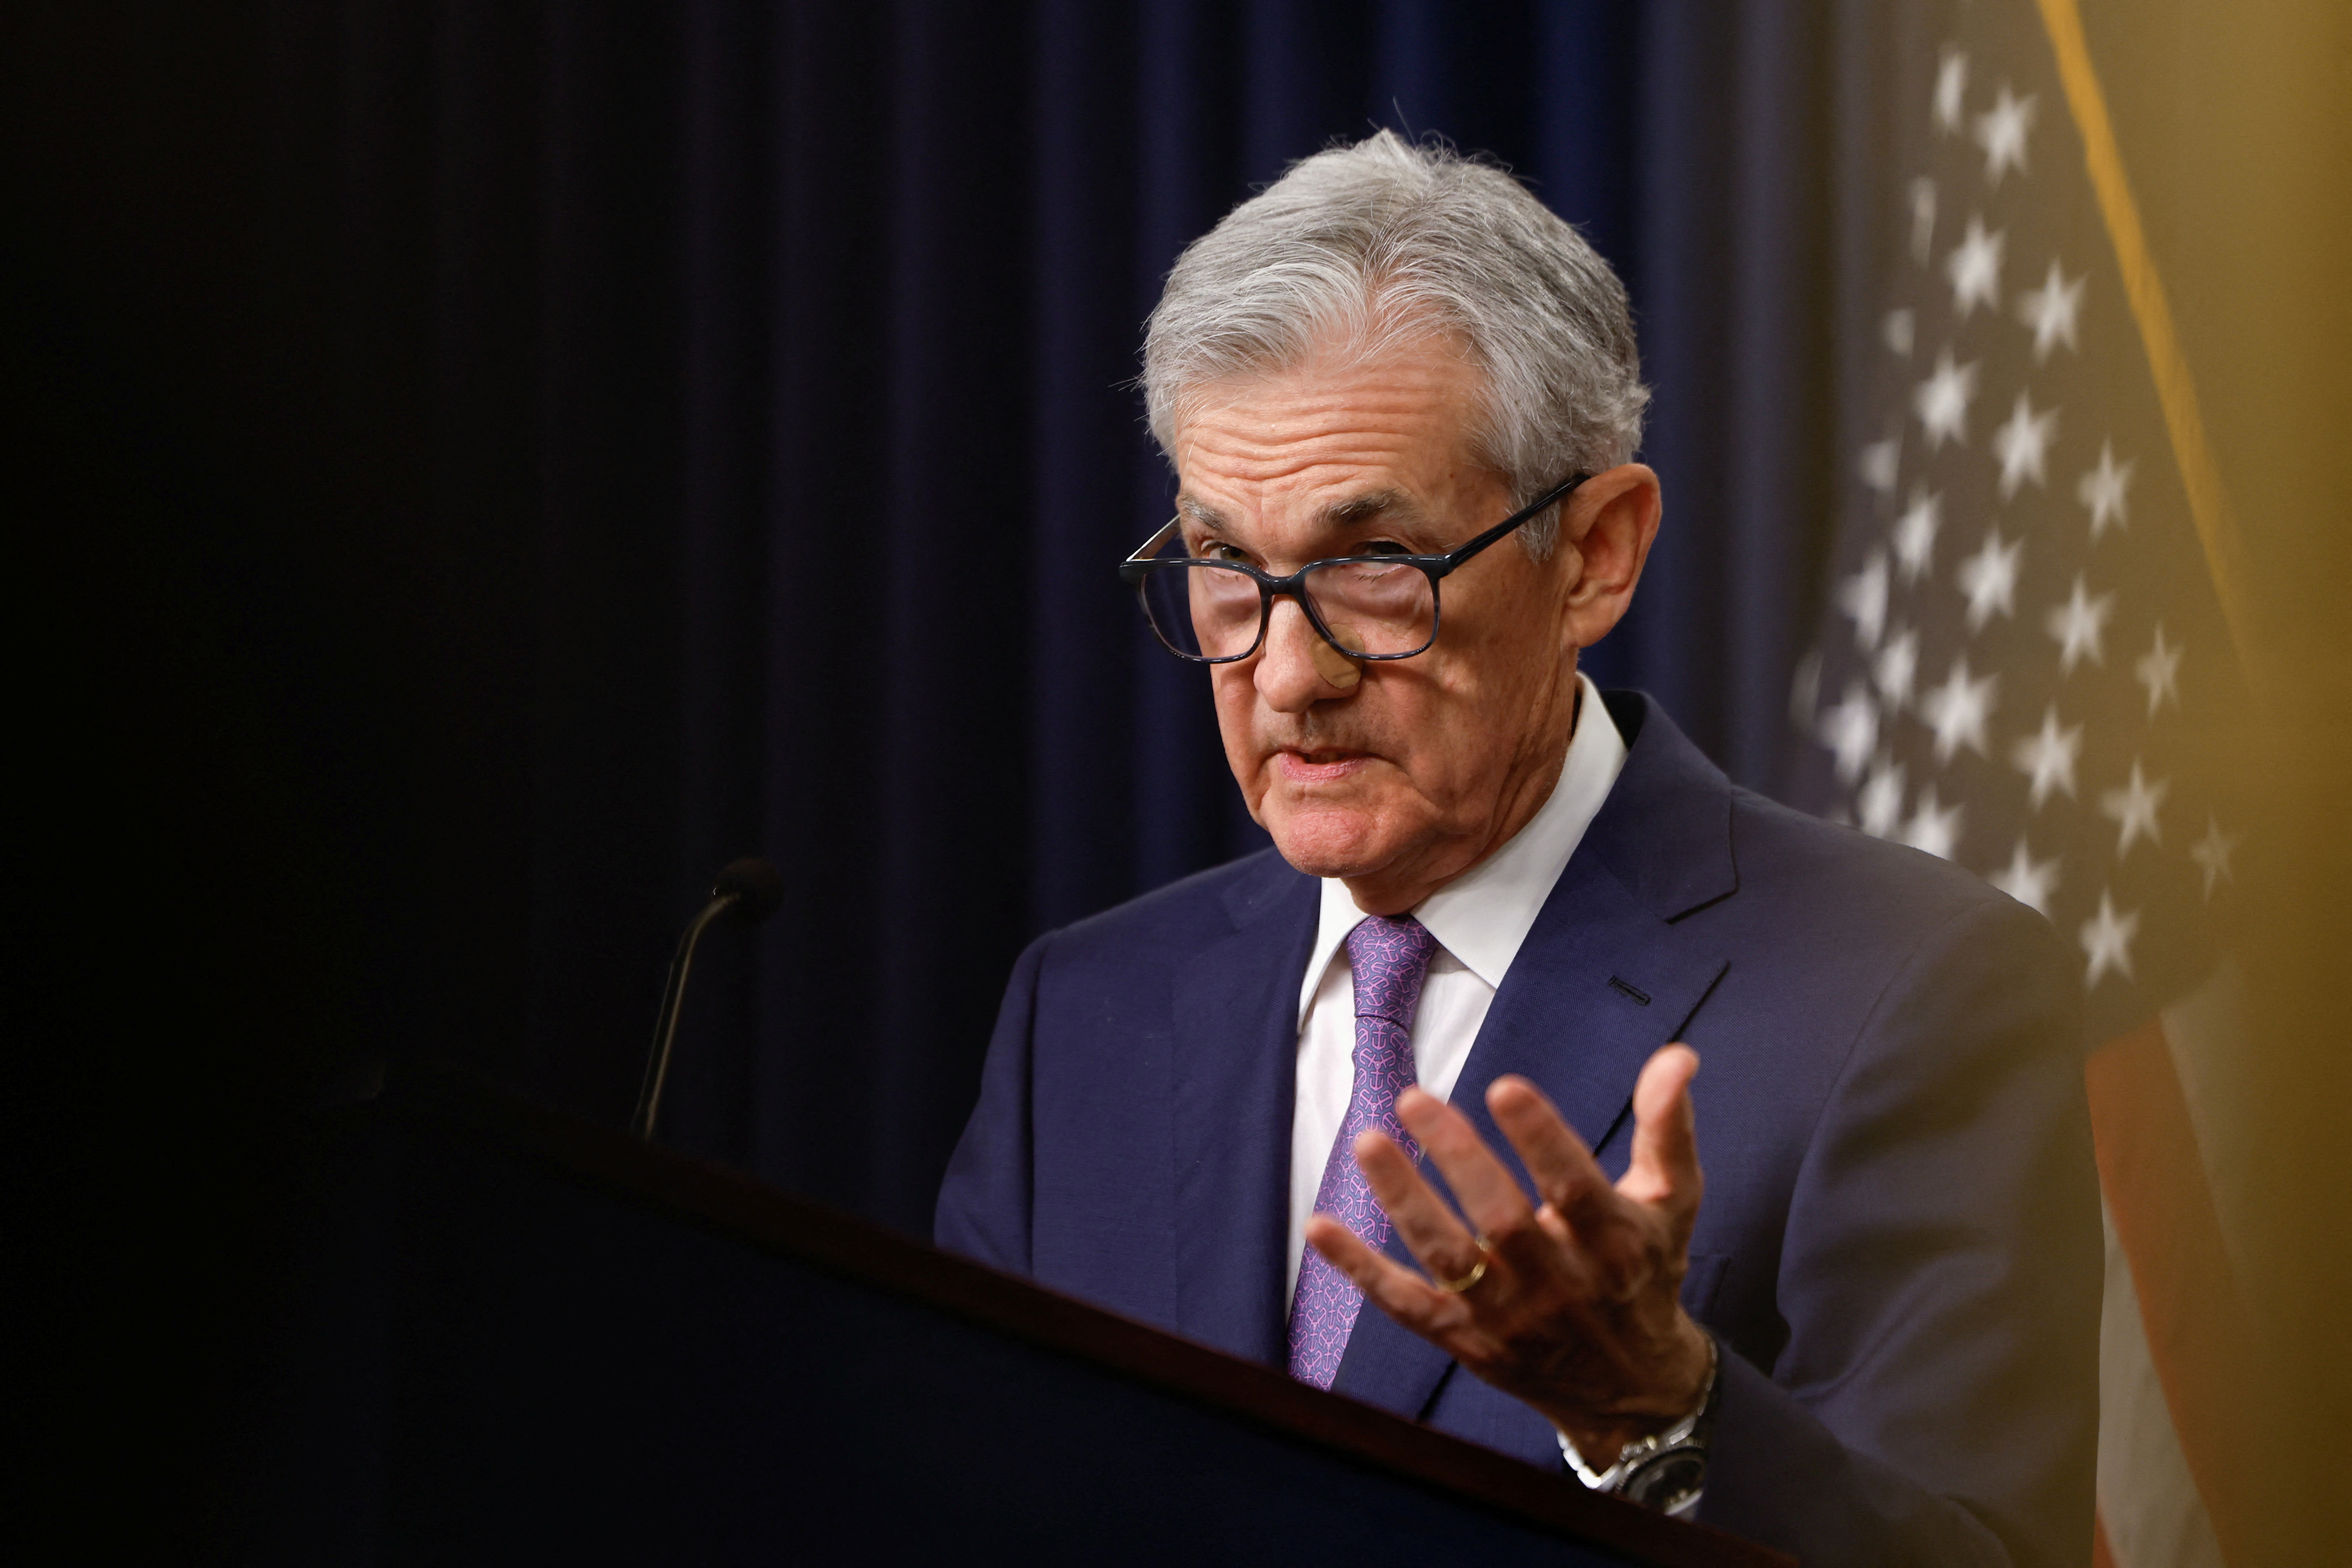 U.S. Federal Reserve Chair Jerome Powell delivers remarks during a press conference, in Washington